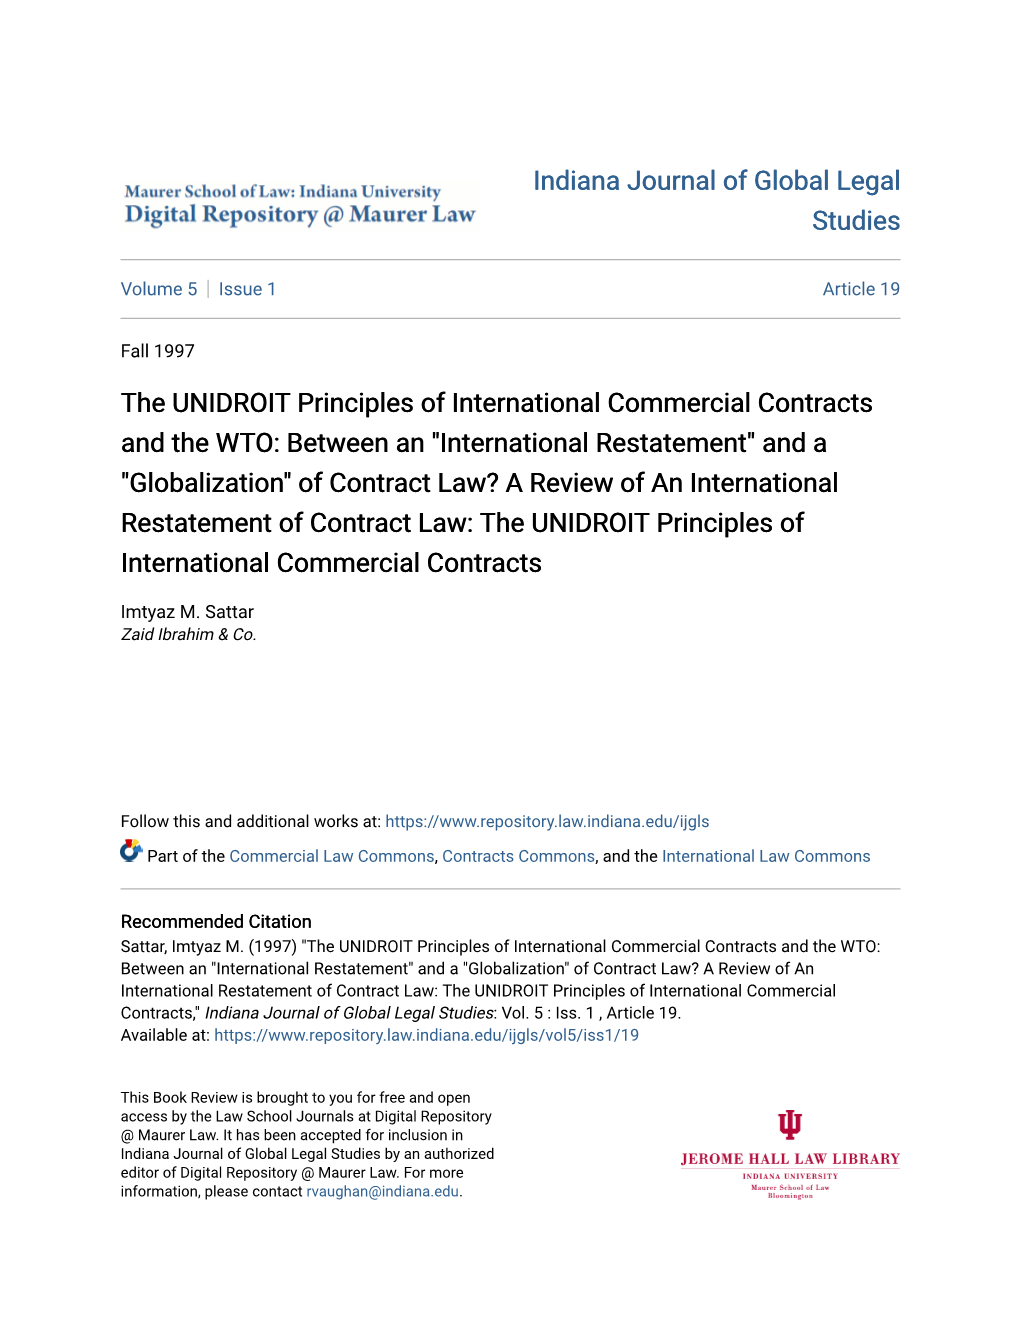 The UNIDROIT Principles of International Commercial Contracts